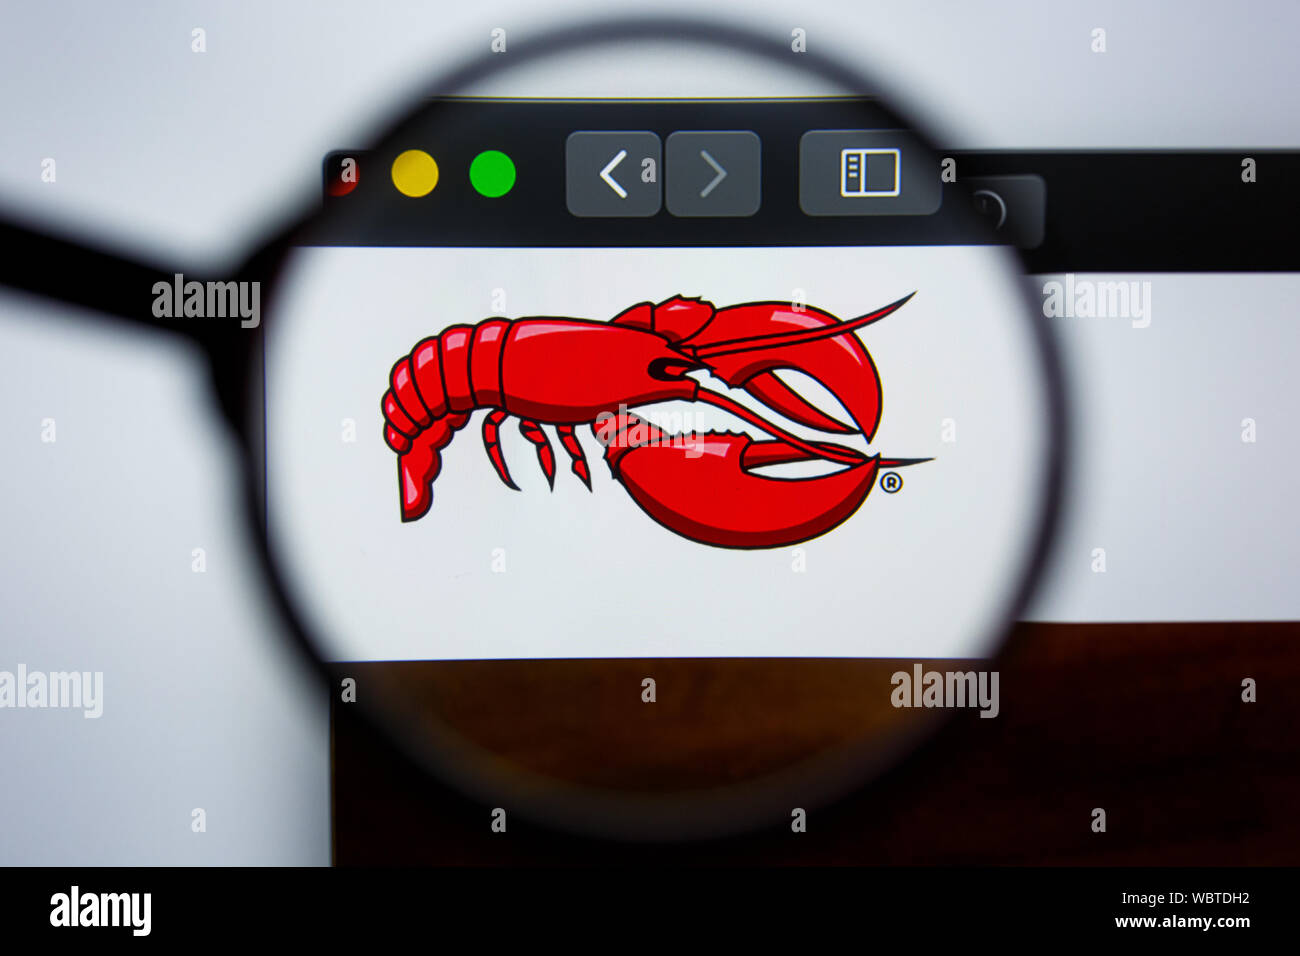 Los Angeles, California, USA - 21 Jule 2019: Illustrative Editorial of REDLOBSTER.COM website homepage. RED LOBSTER logo visible on display screen. Stock Photo